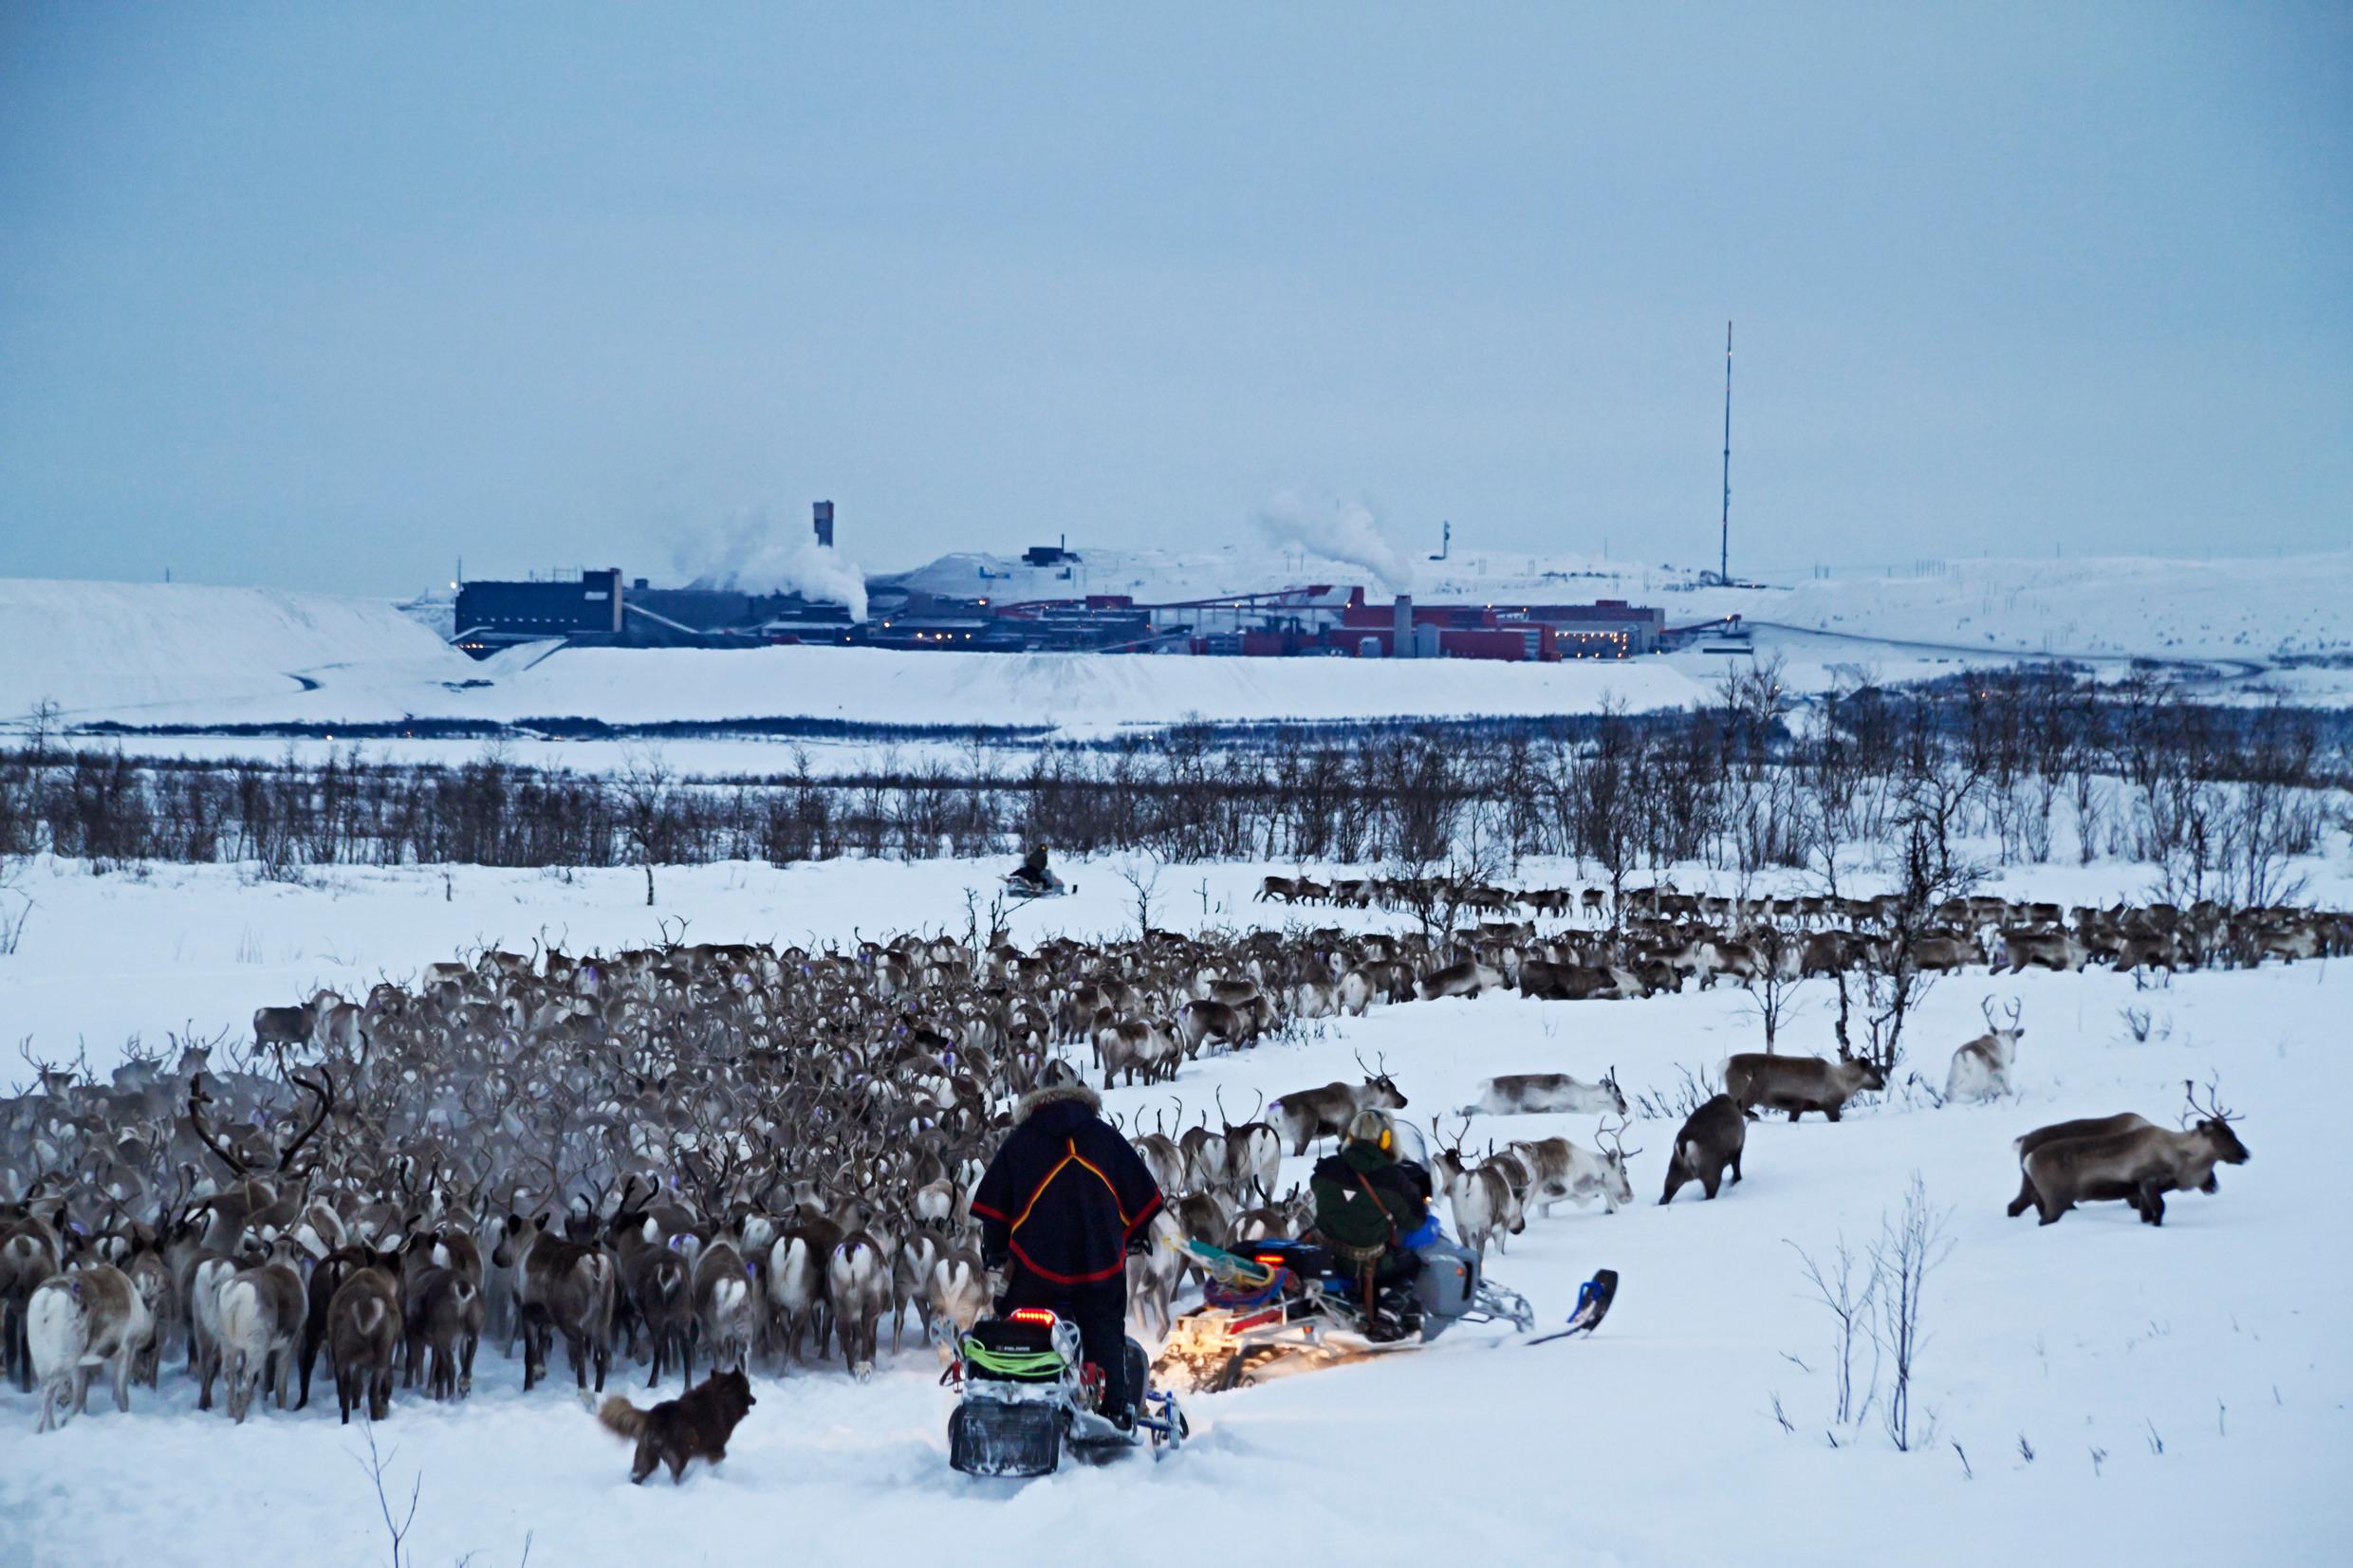 A large herd of reindeer being herded by two people on snowmobiles.